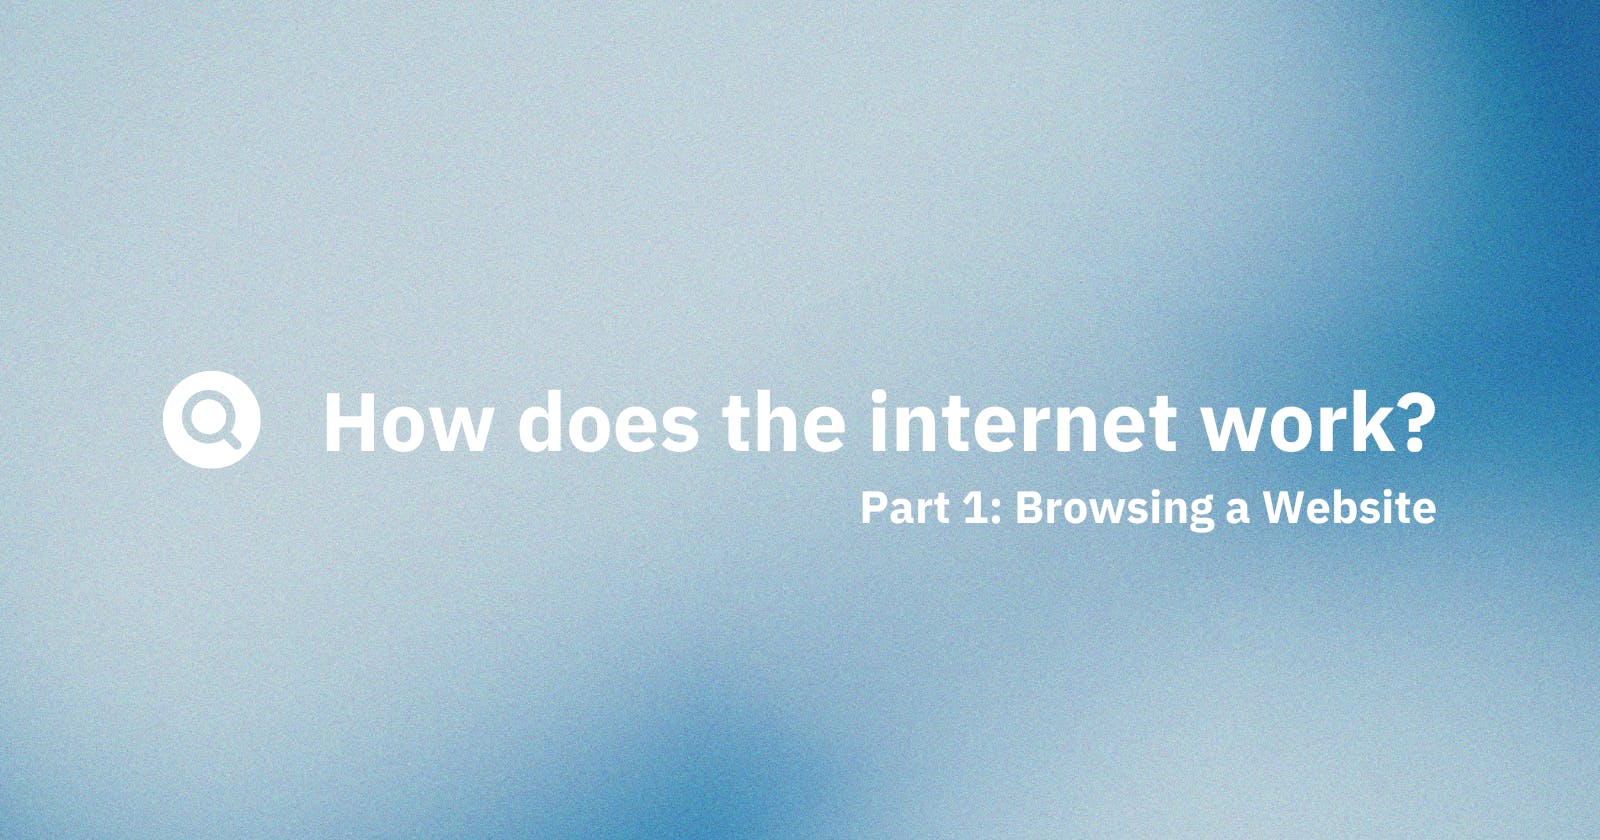 How Does the Internet Work? Part 1 - Browsing a Website